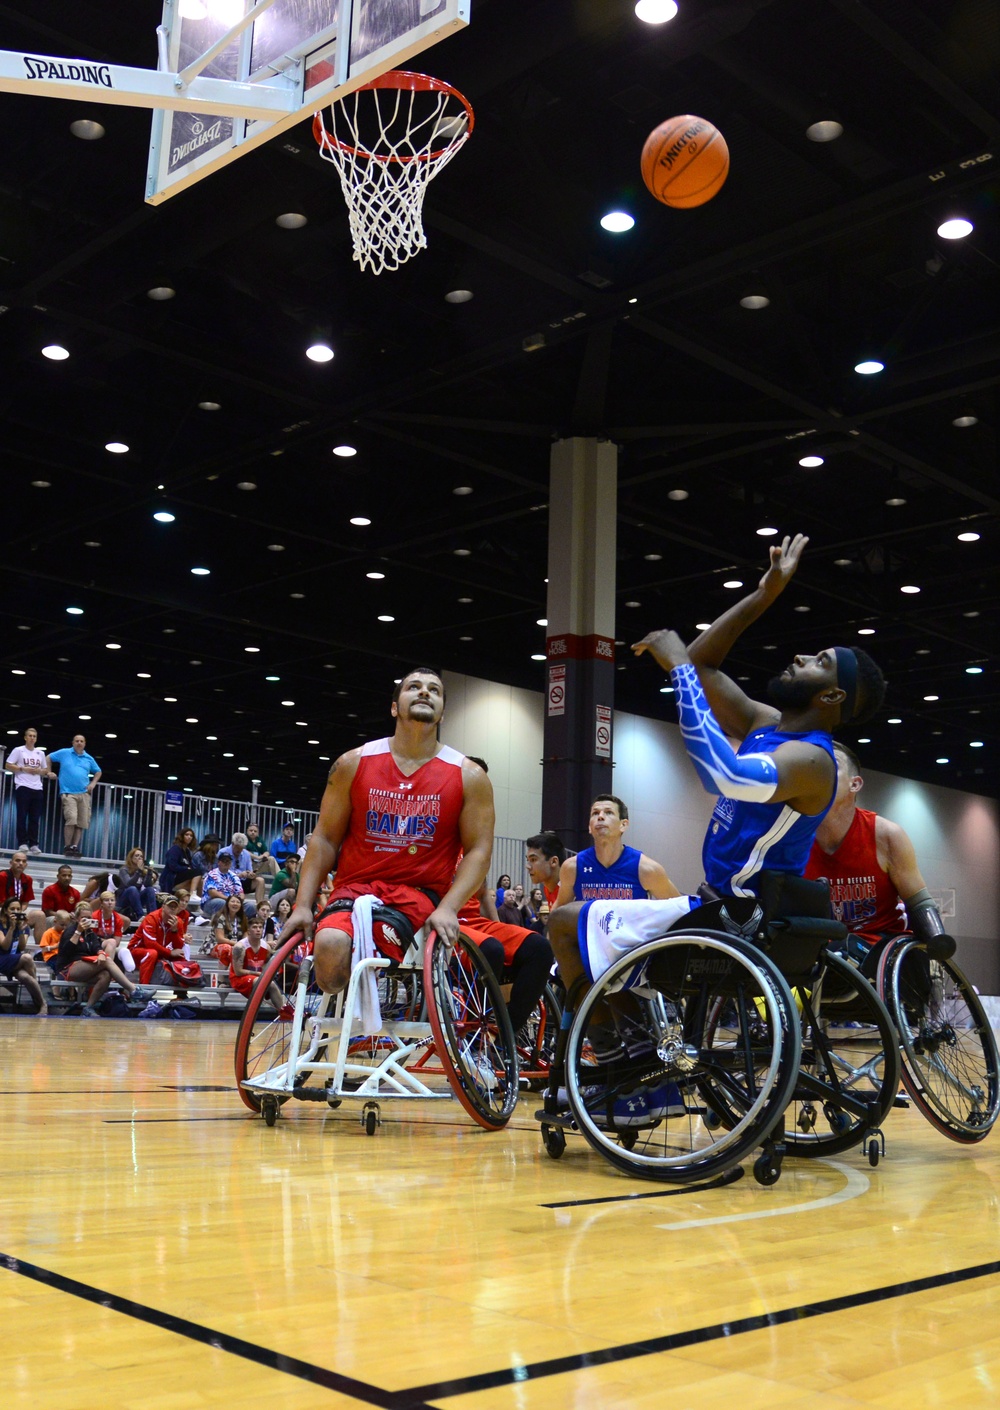 2017 Warrior Games events commence: Wheelchair basketball